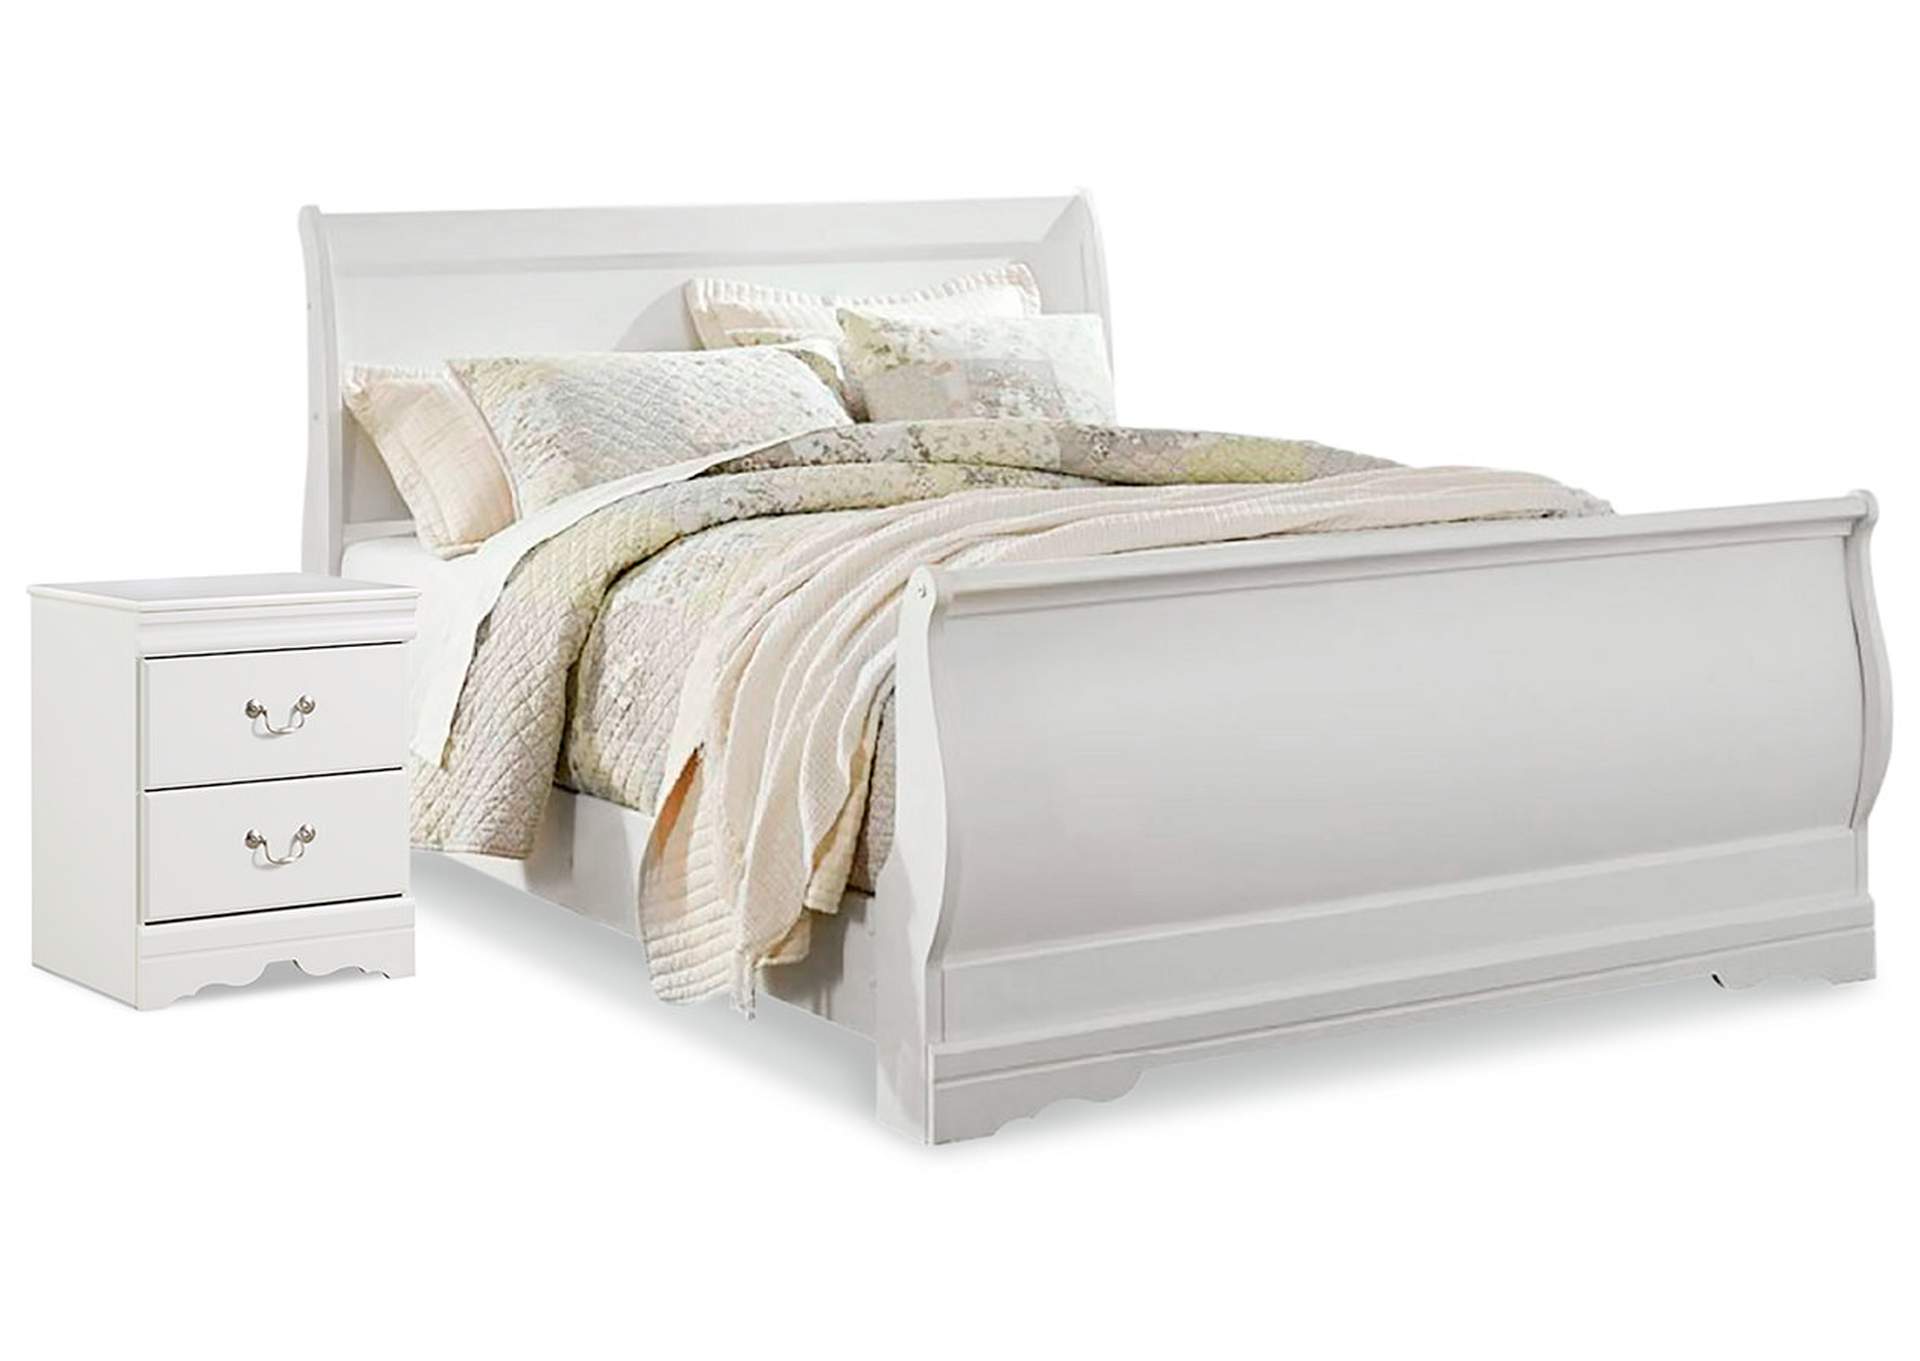 Anarasia Queen Sleigh Bed and Nightstand,Signature Design By Ashley